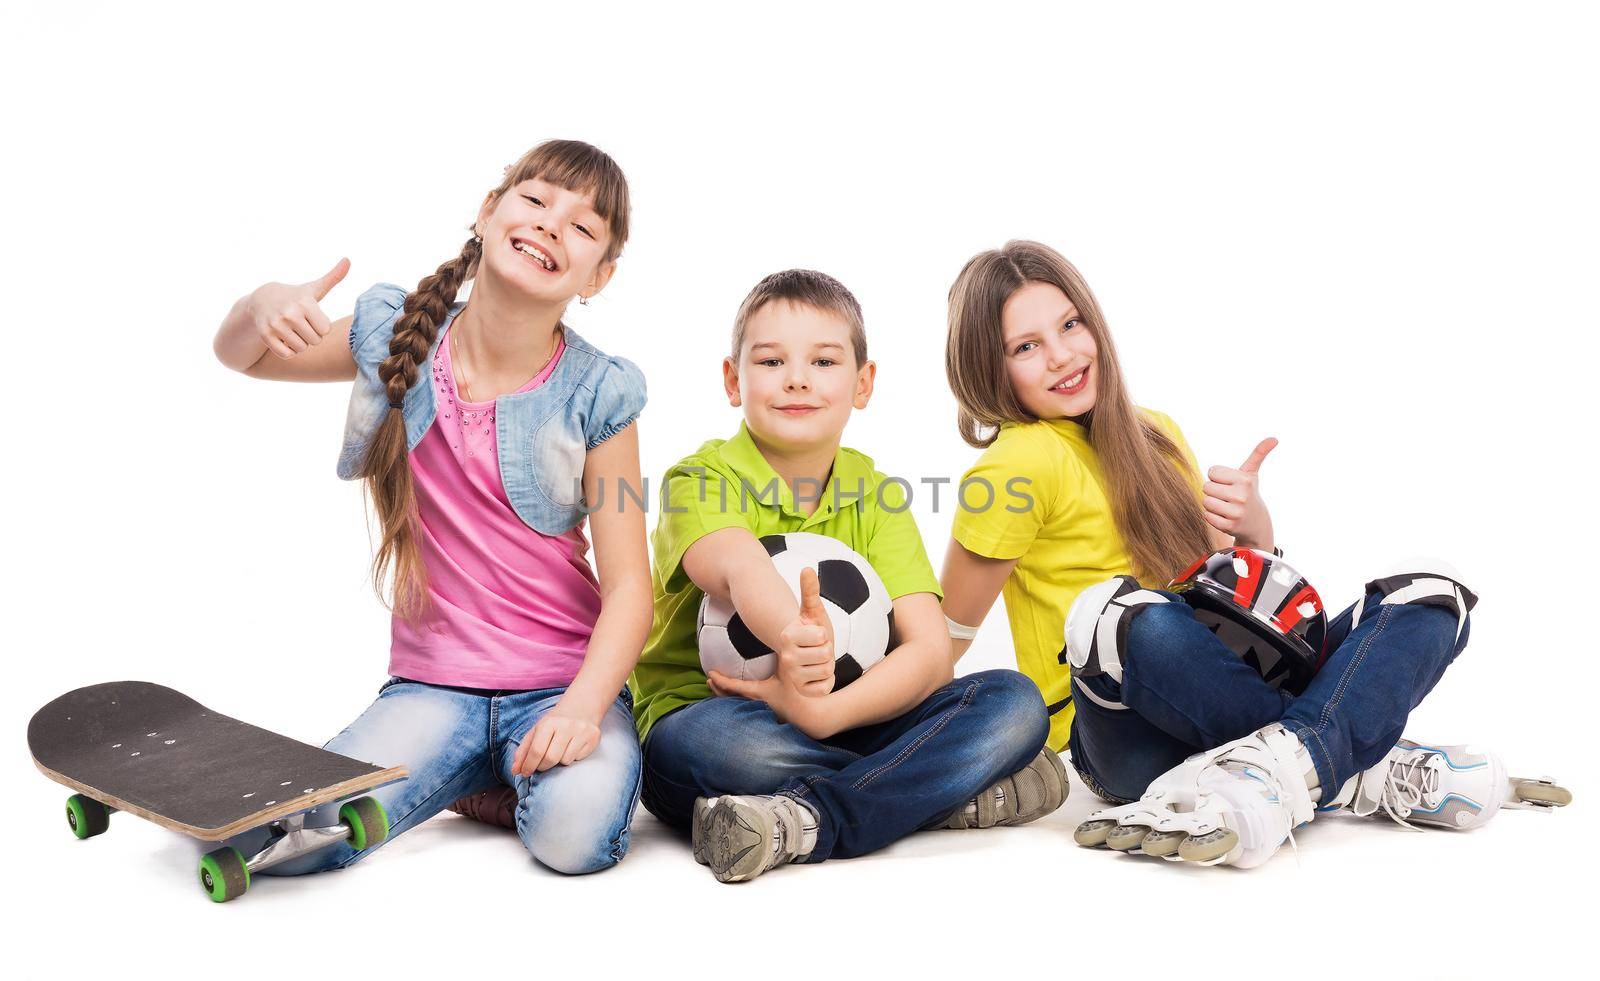 laughing schoolchildren with sport equipment on the floor isolated on white background